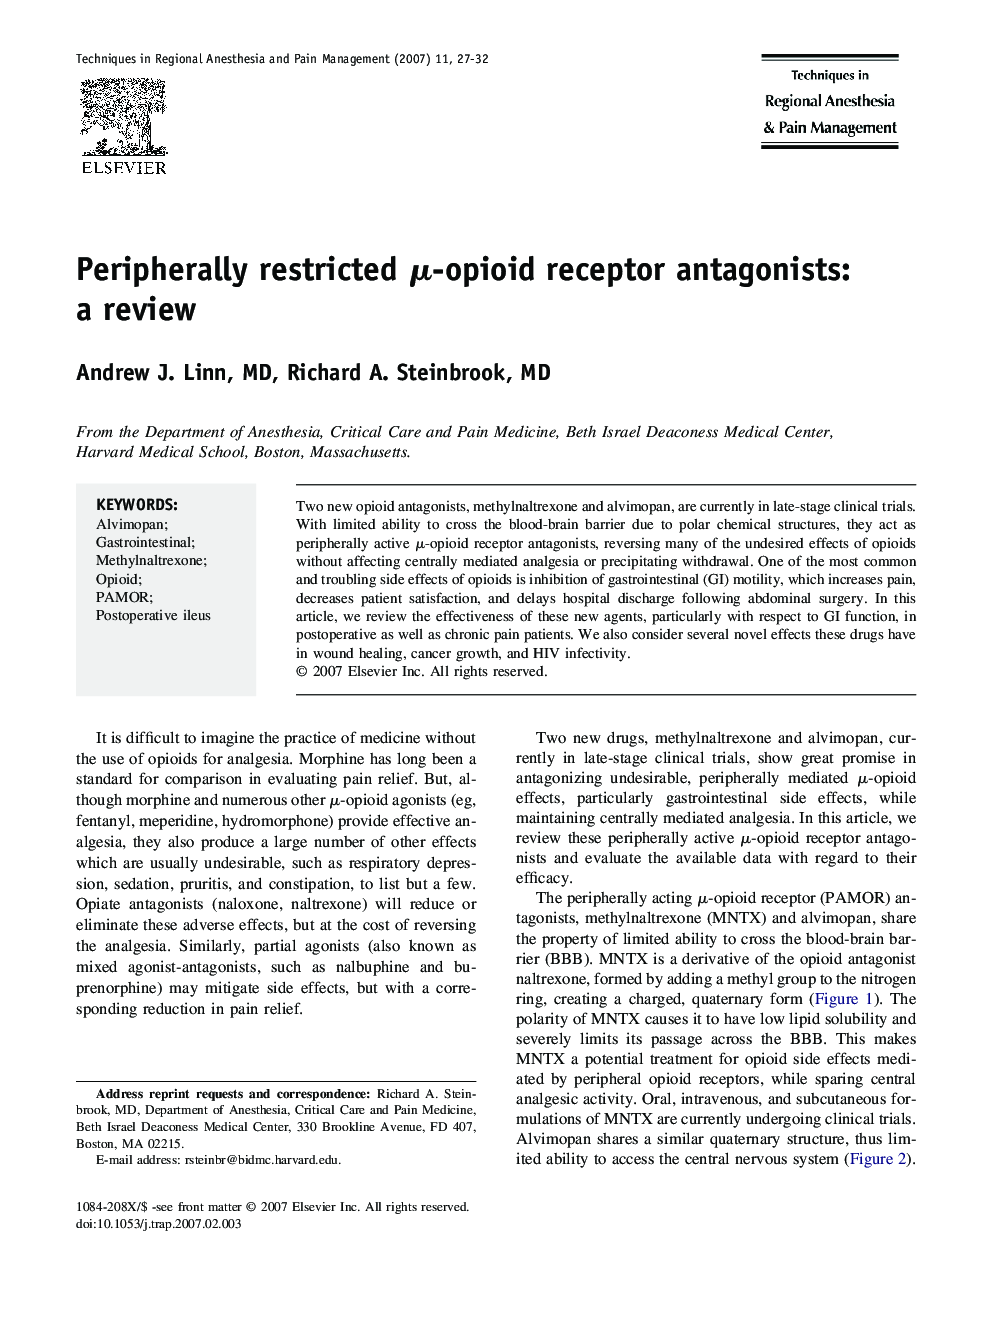 Peripherally restricted Î¼-opioid receptor antagonists: a review